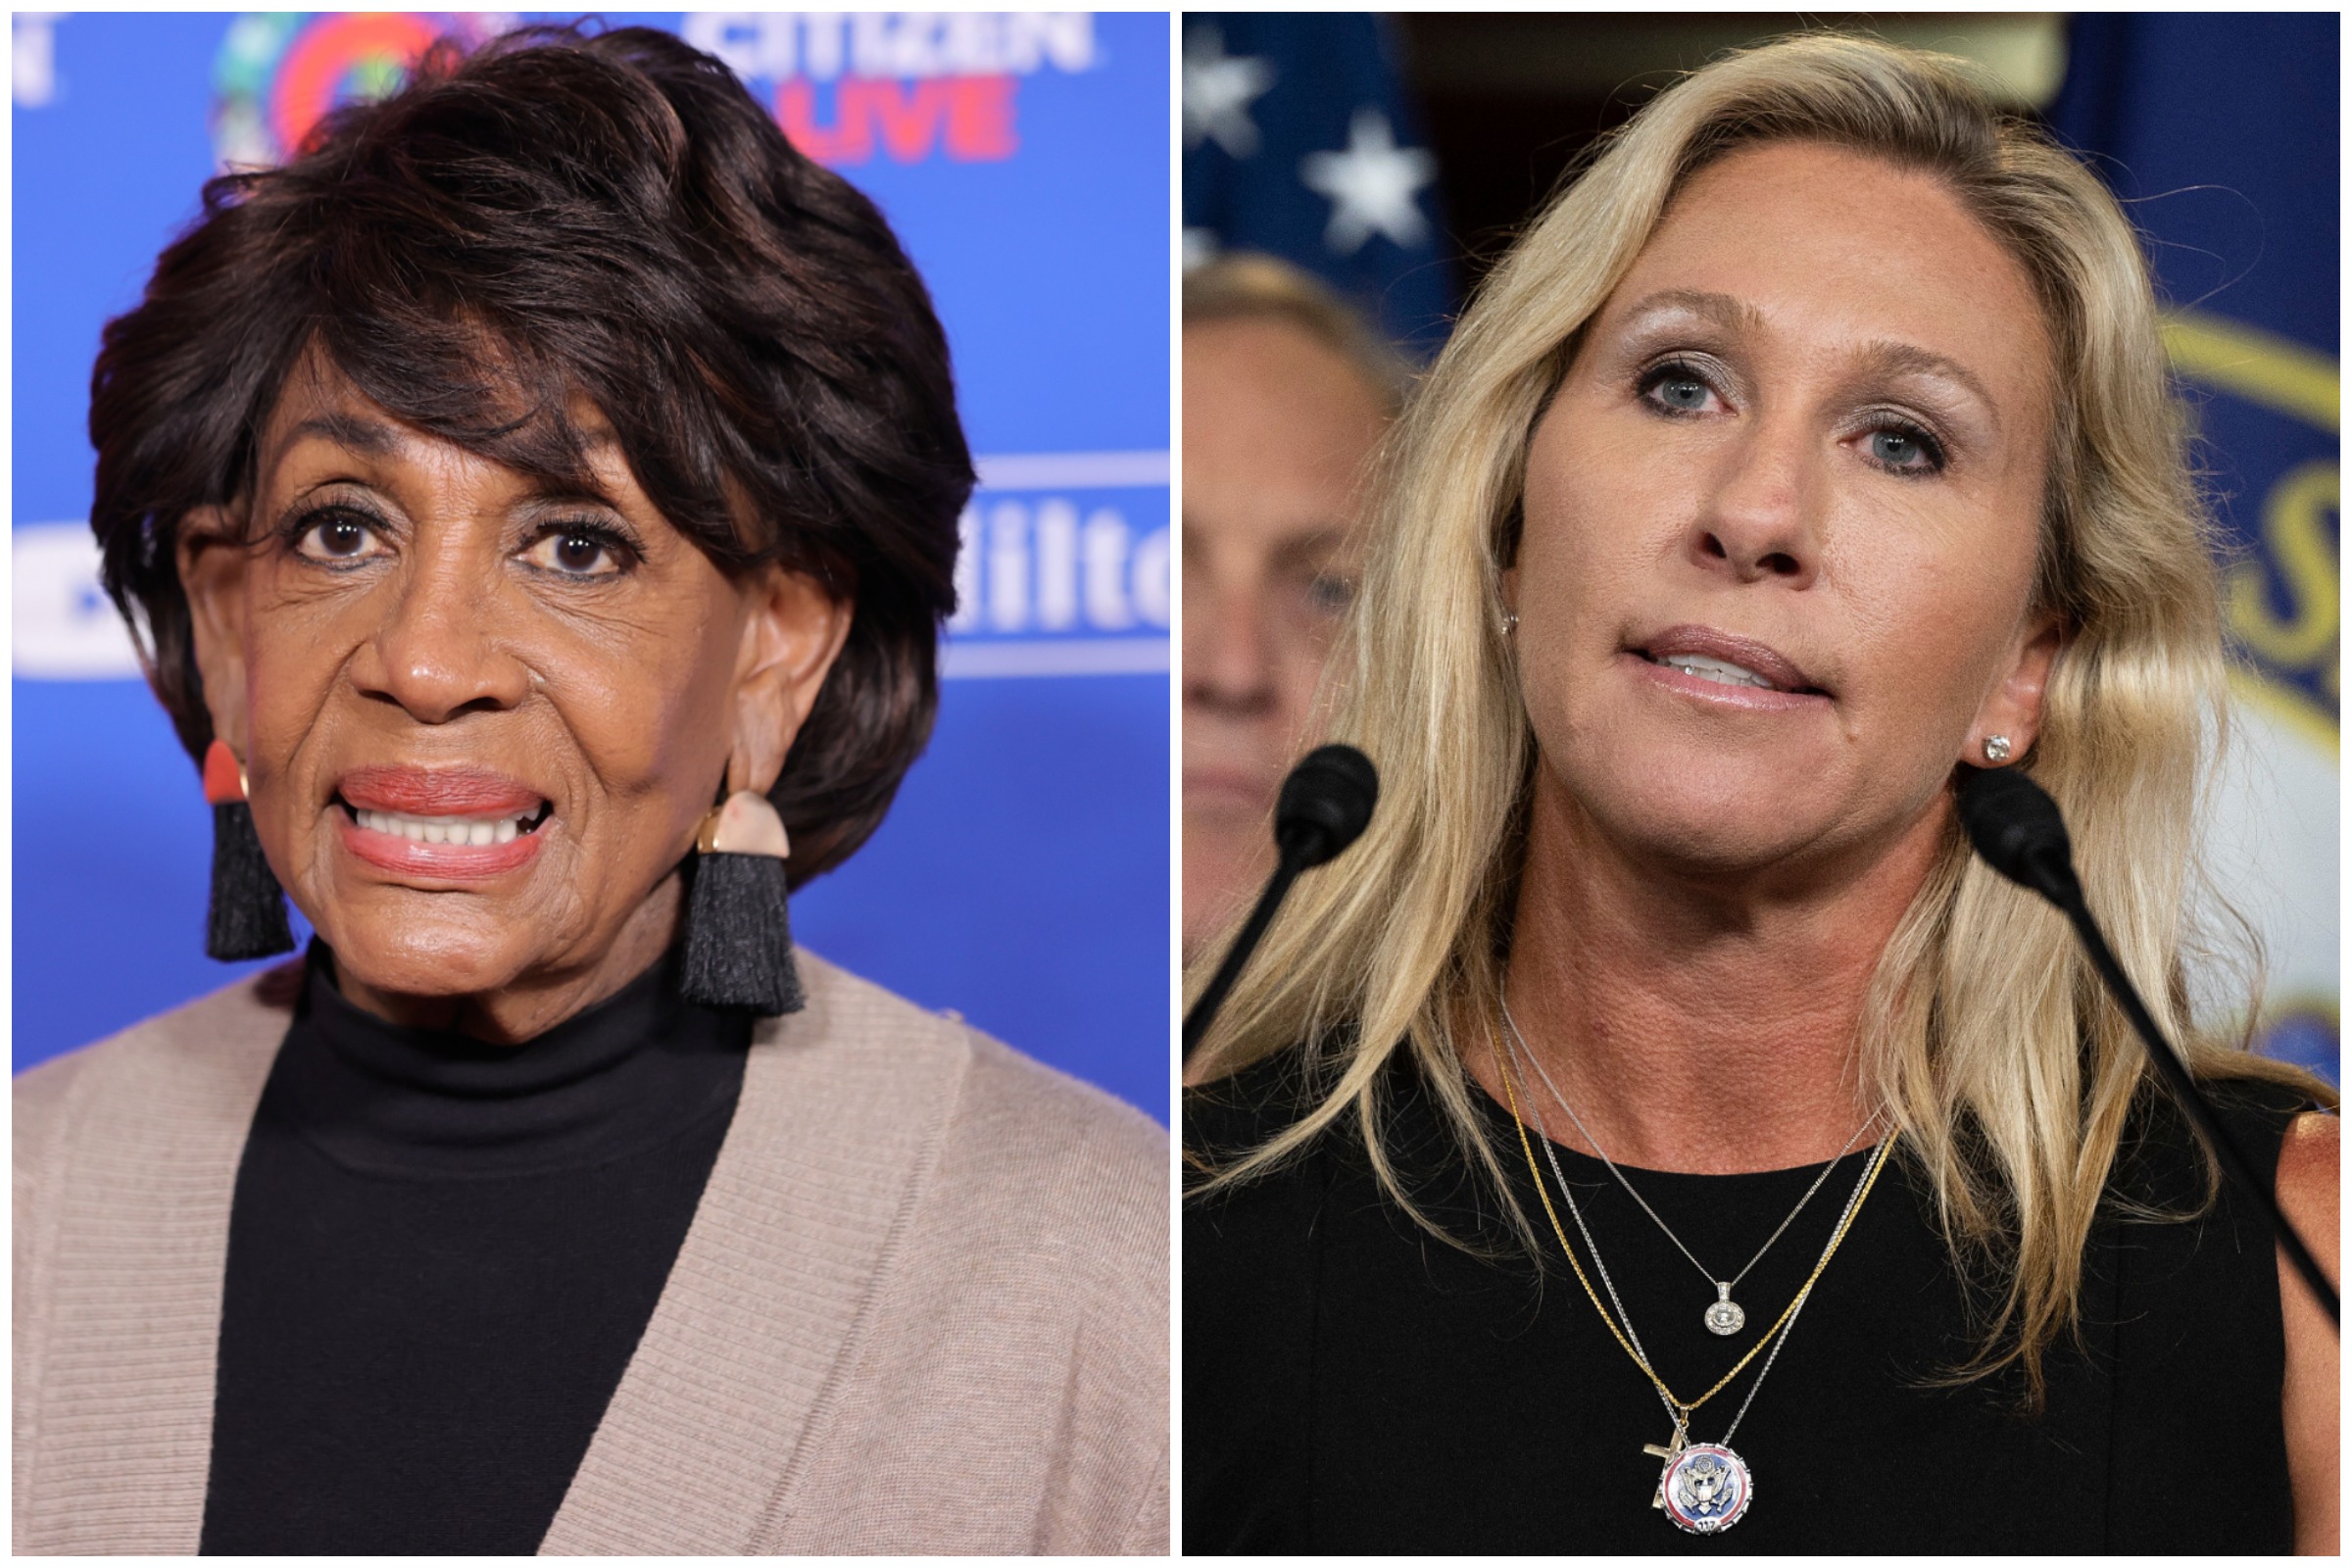 Maxine Waters calls Marjorie Taylor Greene an “extremist radical” who should not be in Congress